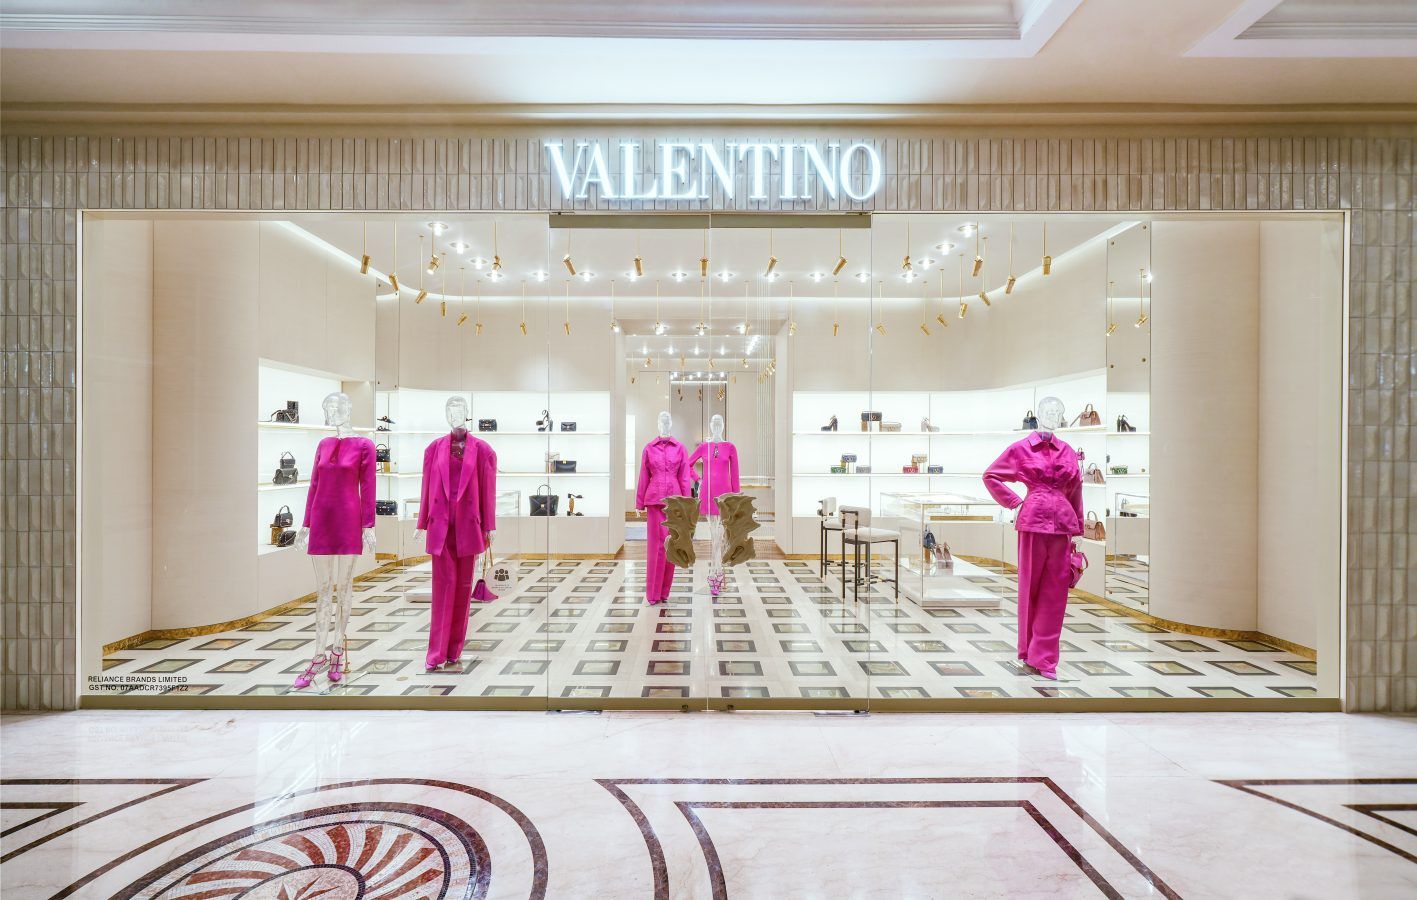 The first Valentino boutique in India opens its doors today